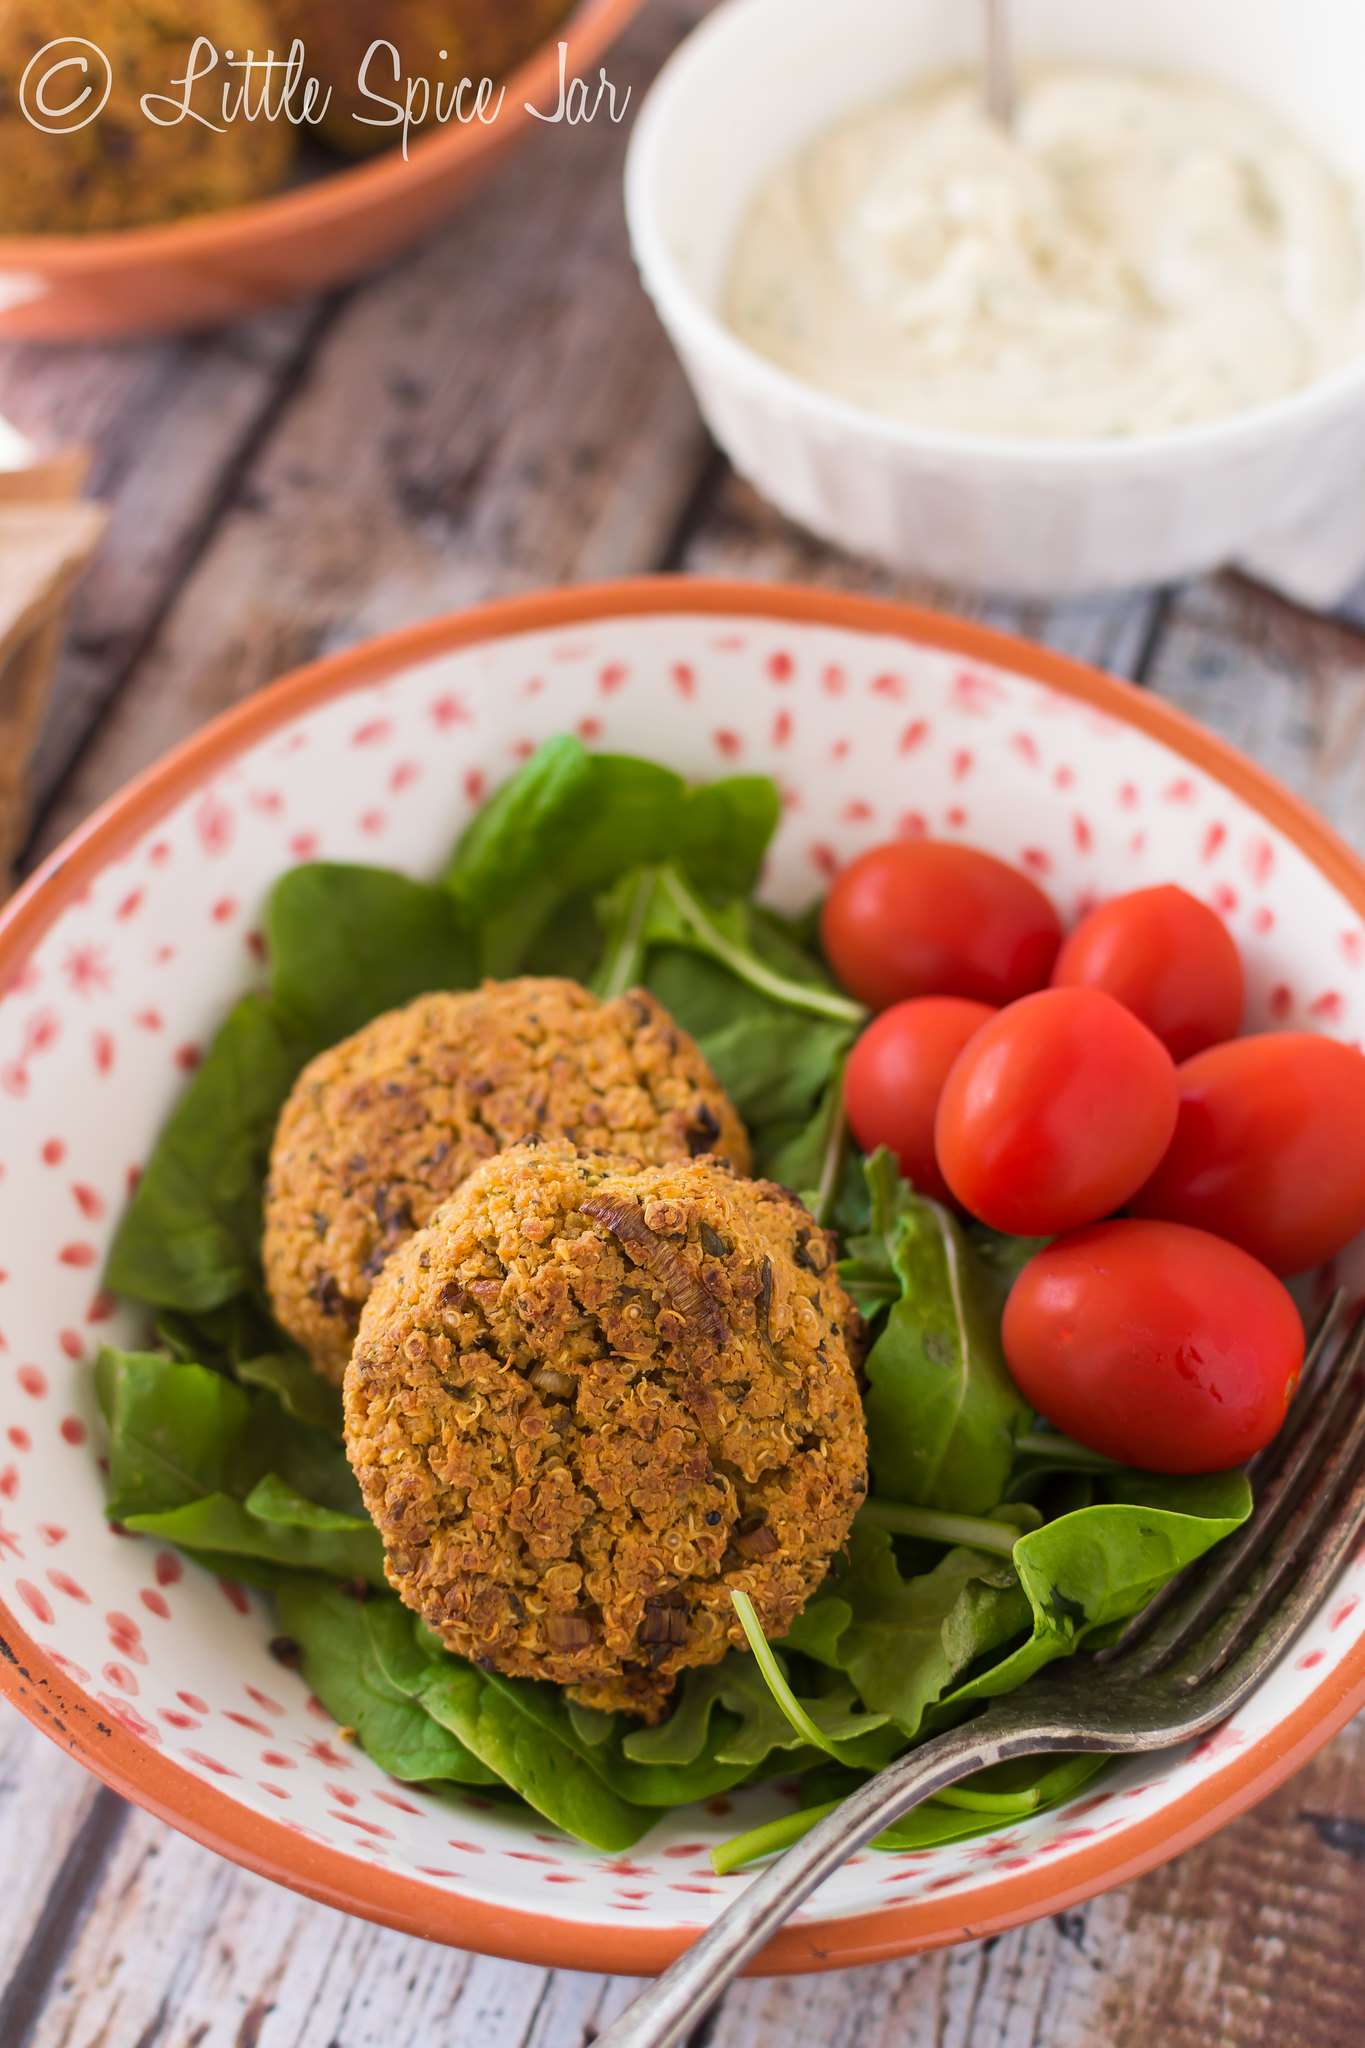 baked quinoa falafel on baby spinach with tomatoes in bowl